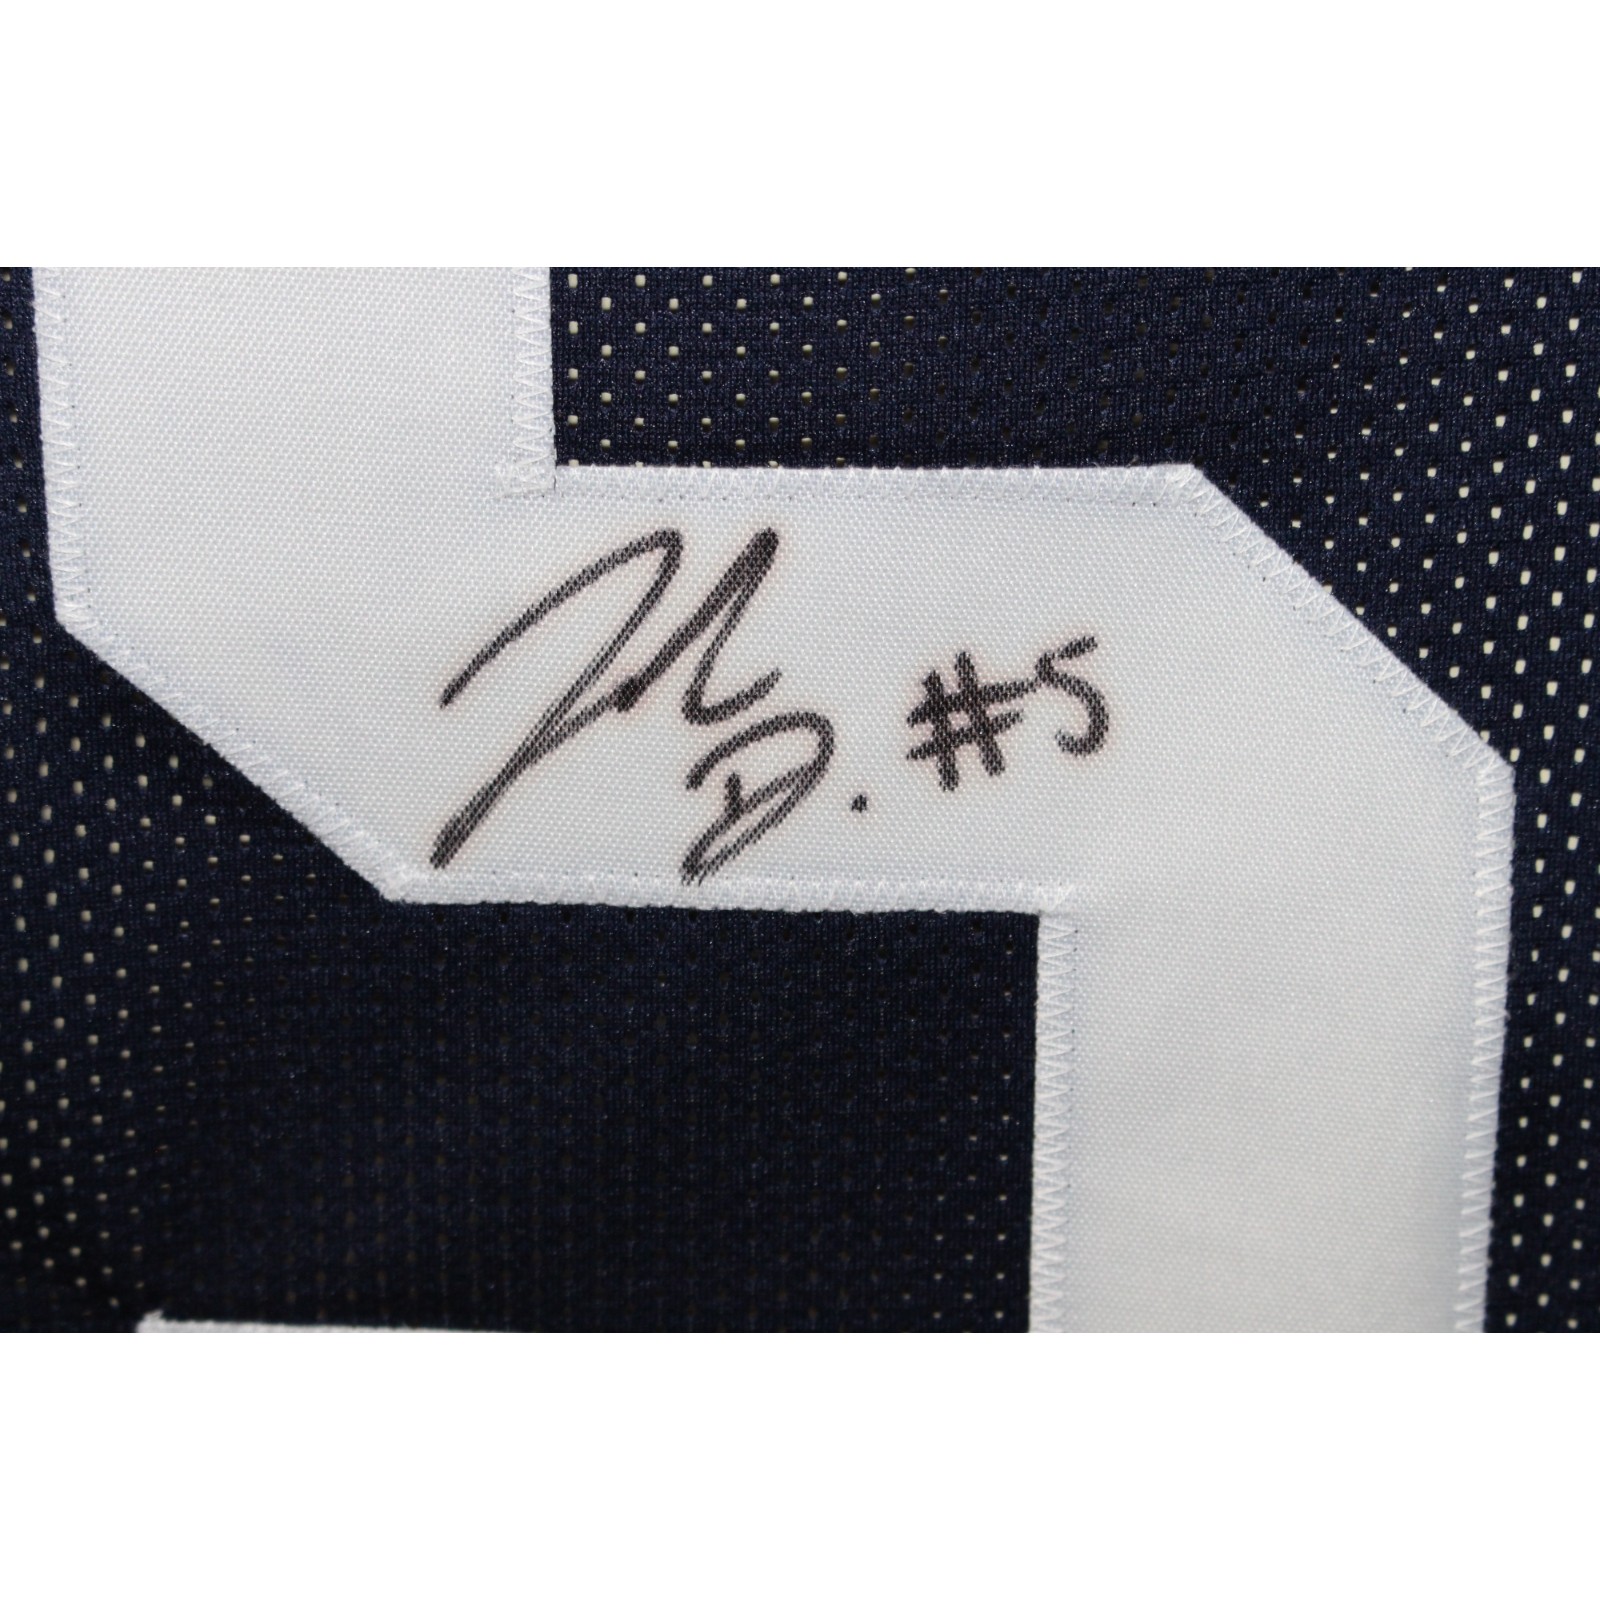 Jahan Dotson Autographed/Signed College Style Navy Jersey Beckett